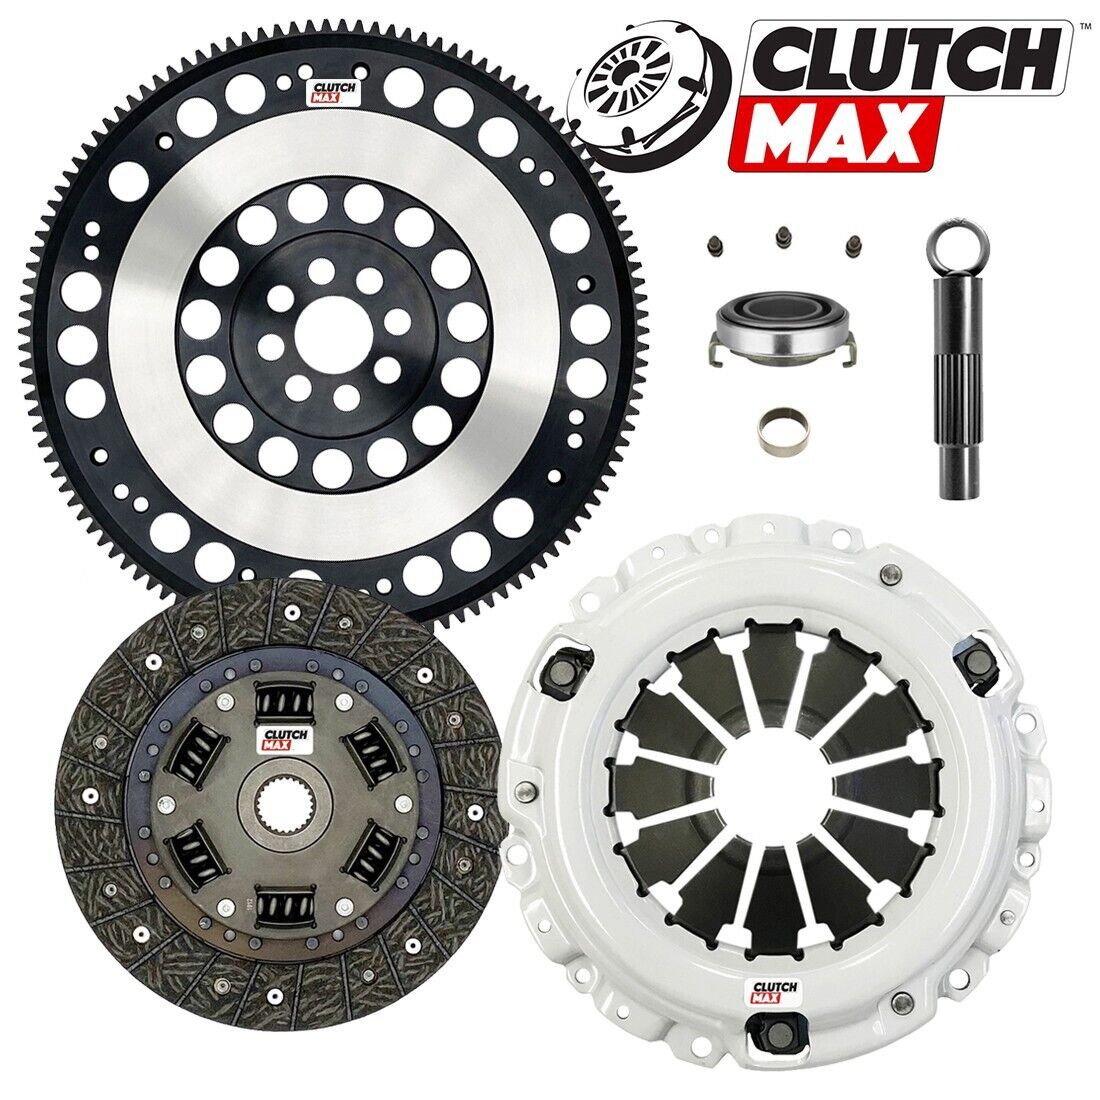 CLUTCHMAX STAGE 2 CLUTCH KIT+ CHROMOLY FLYWHEEL for ACURA CSX RSX HONDA CIVIC Si